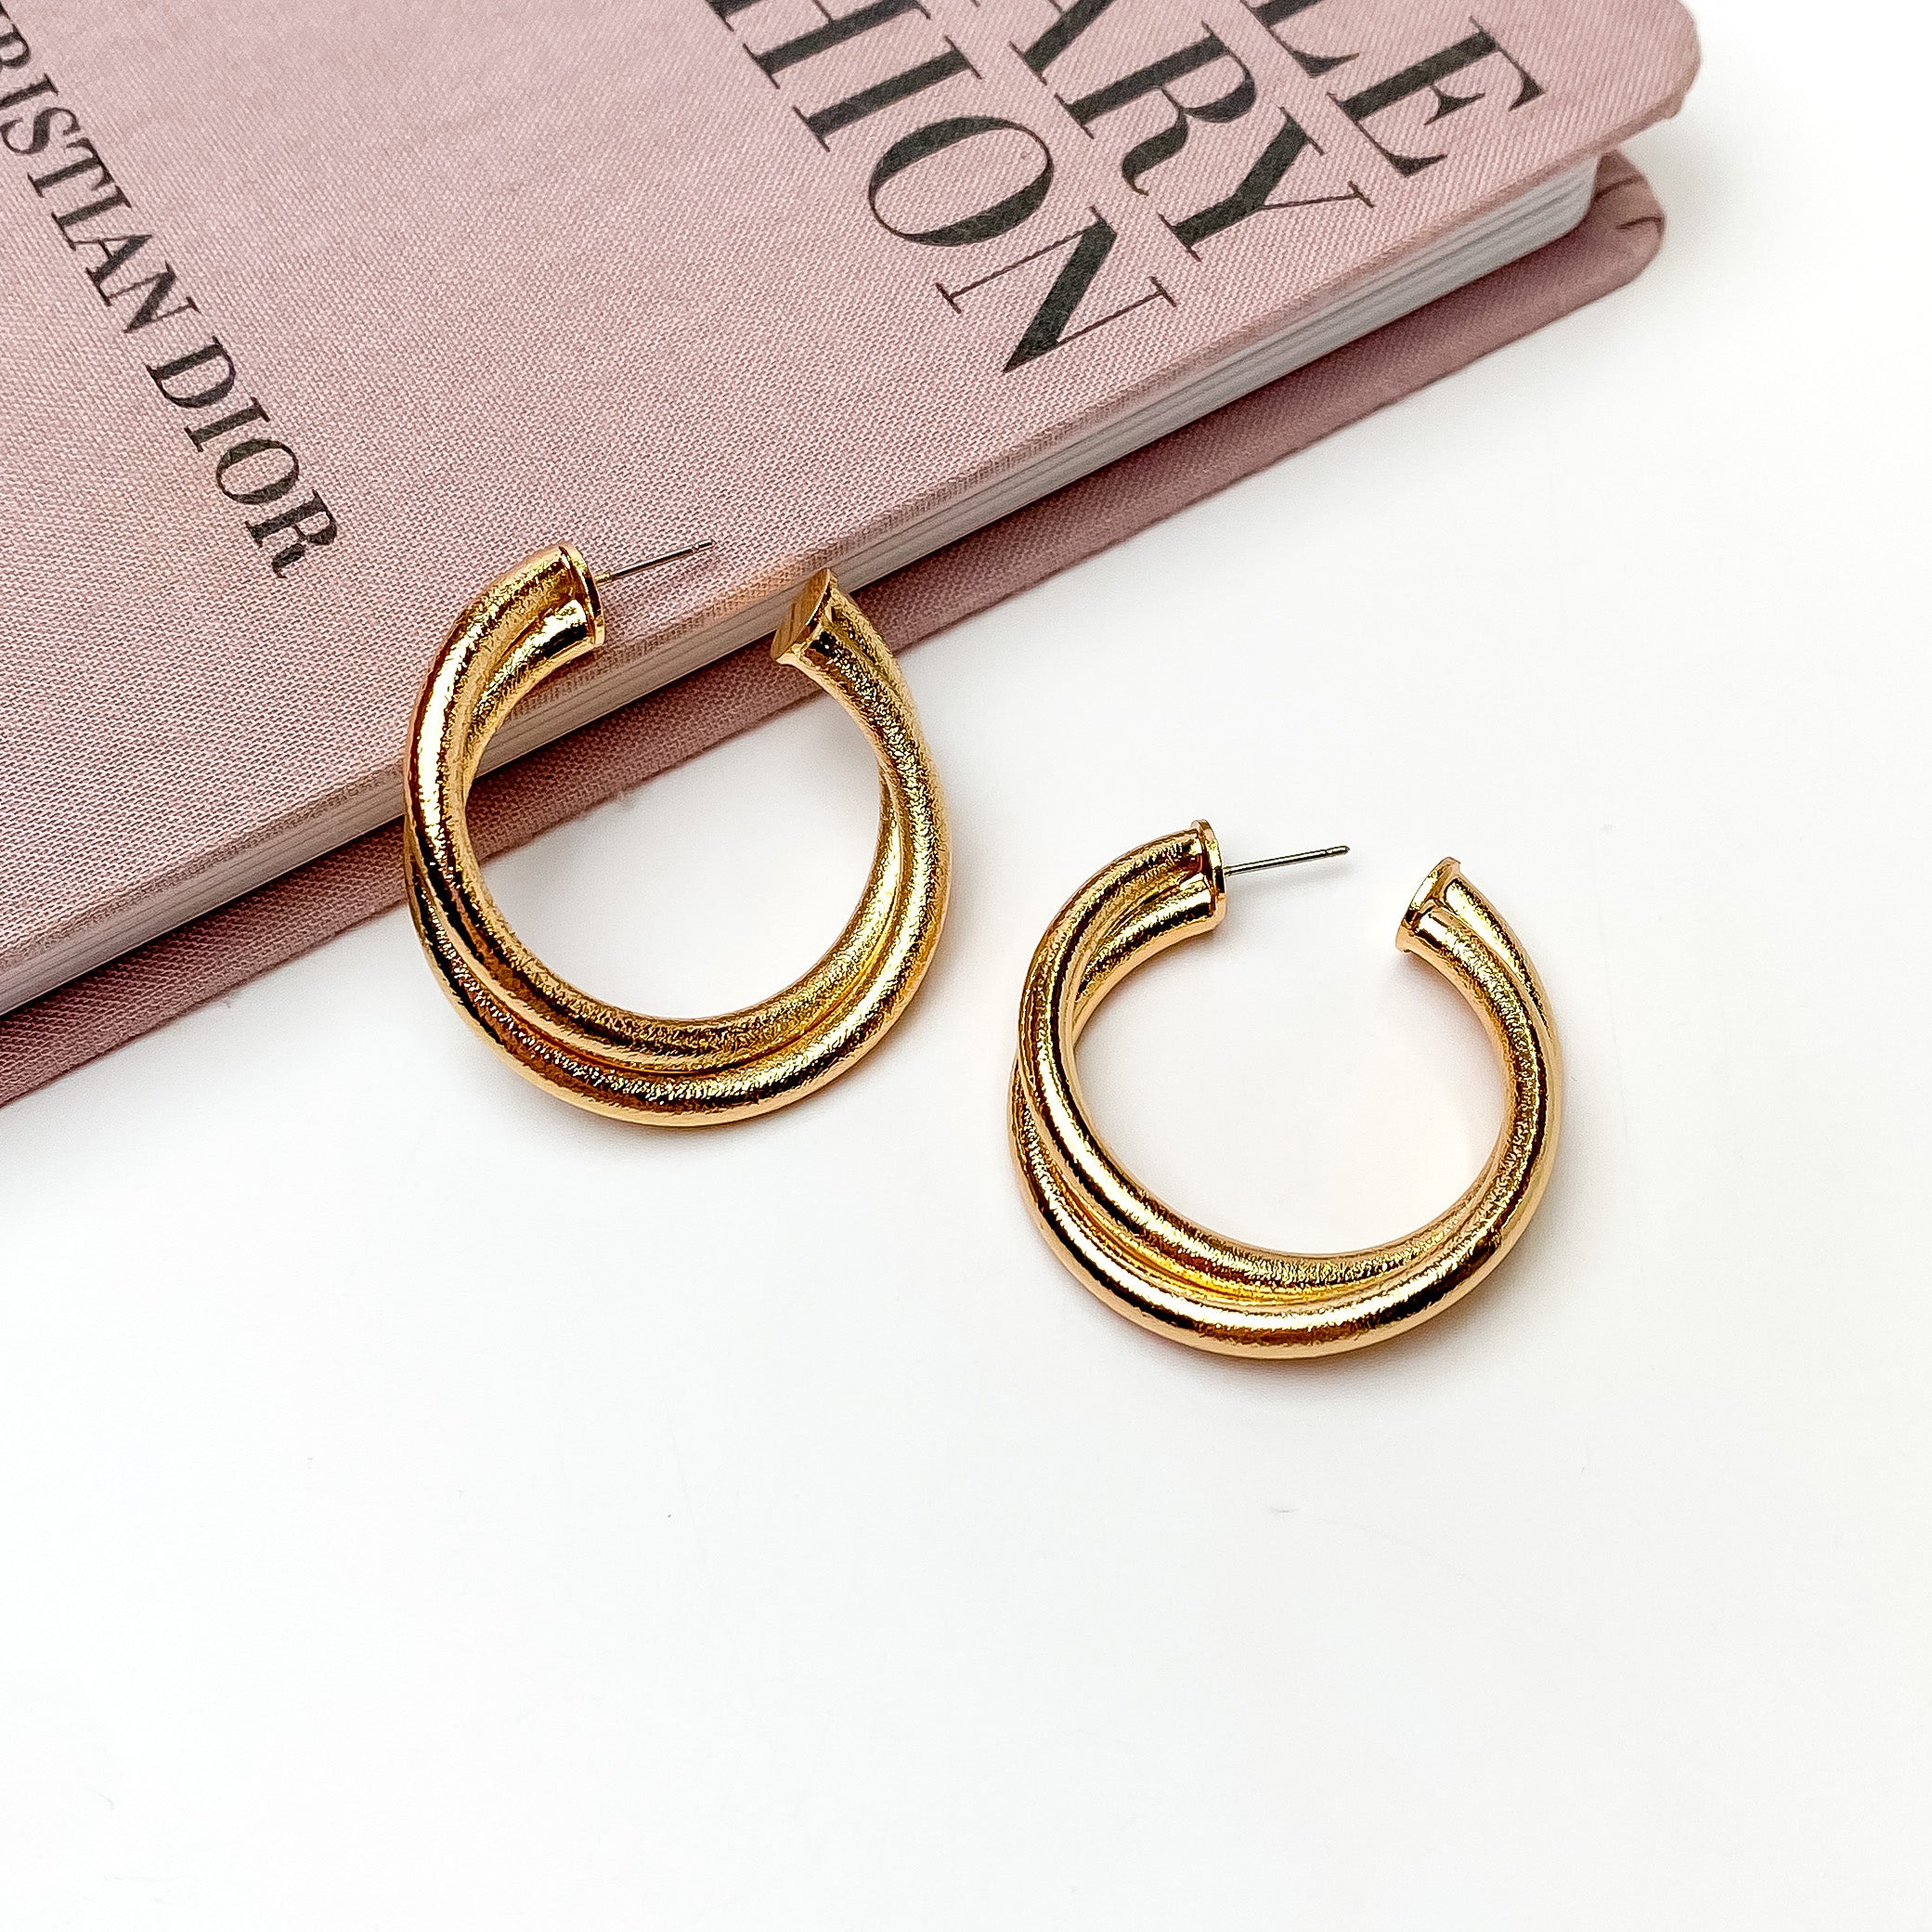 Twisted Hoop Earrings in Textured Gold Tone - Giddy Up Glamour Boutique